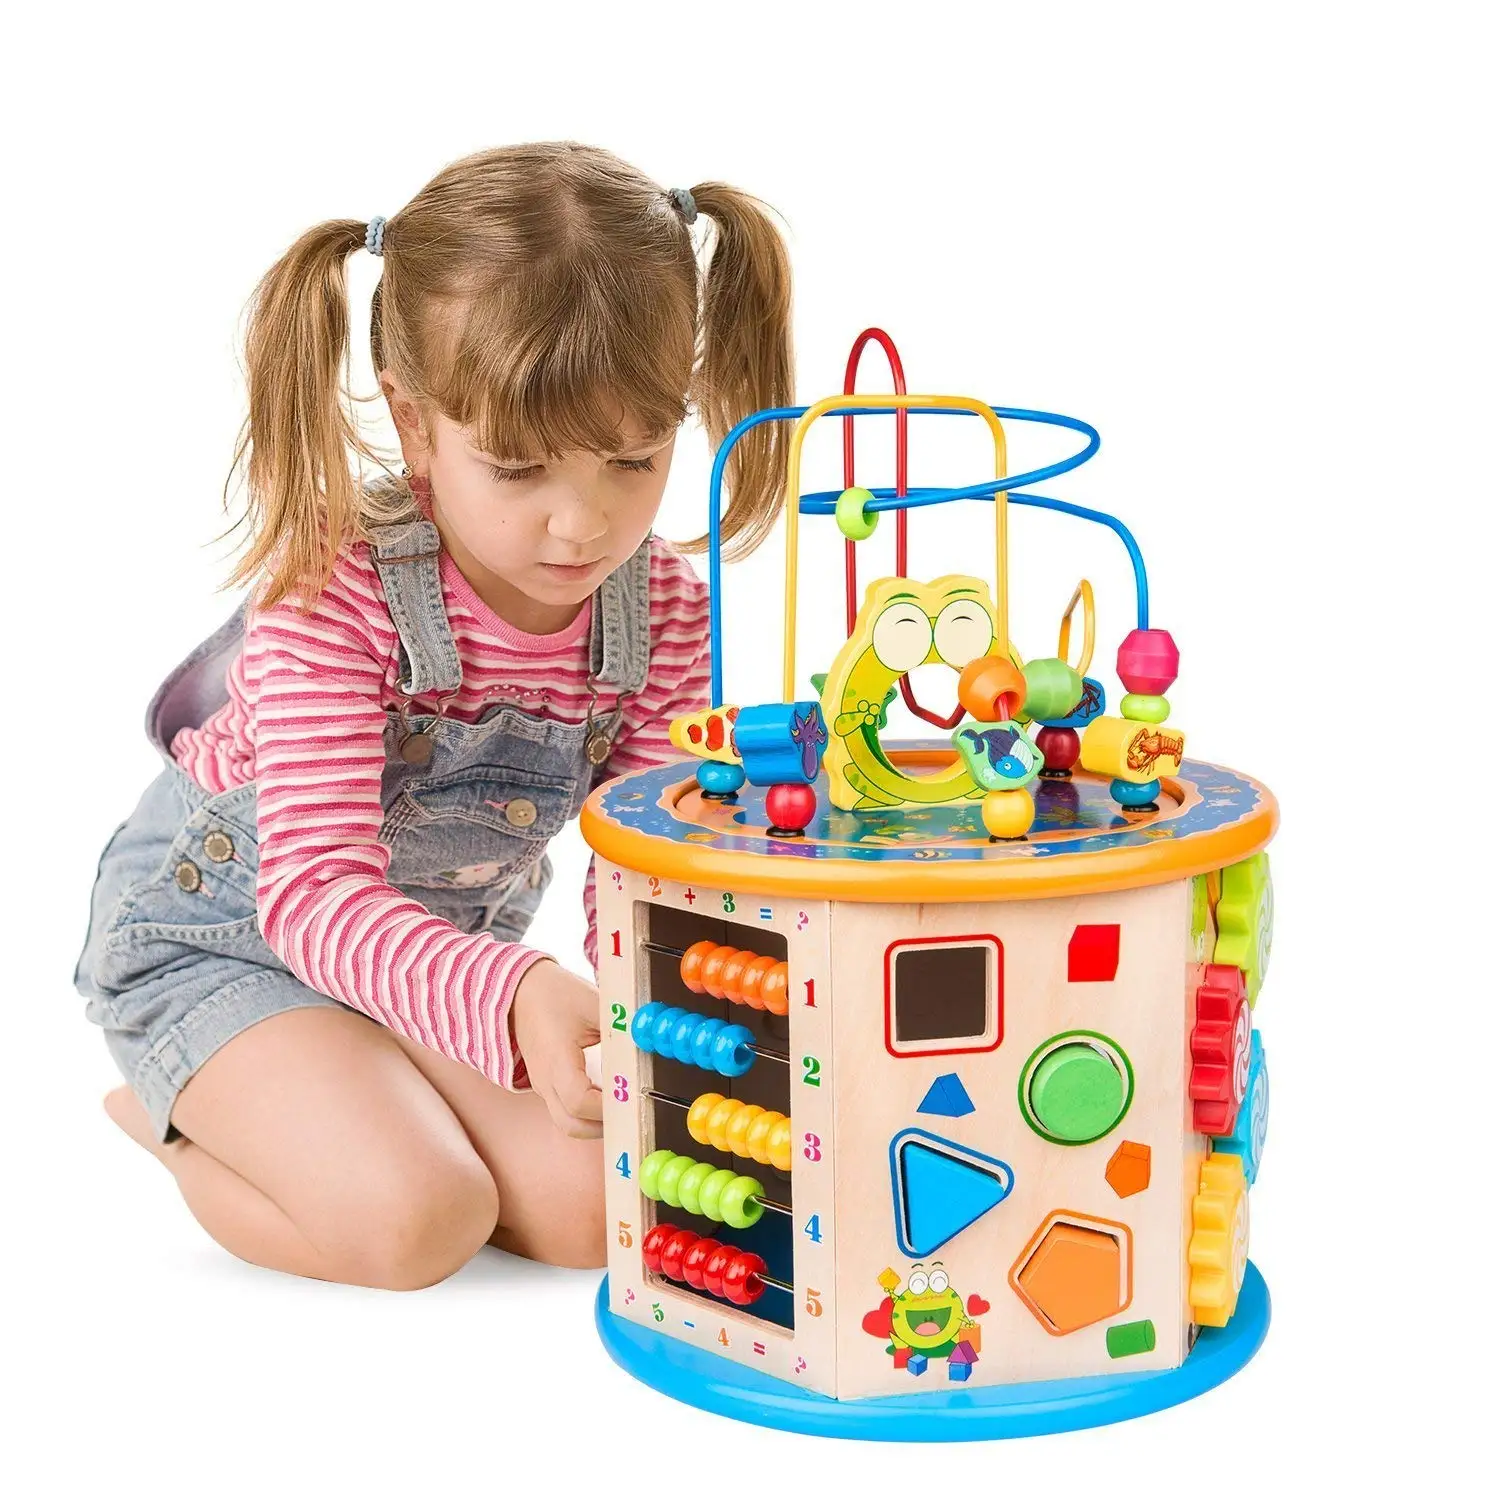 three year old learning toys